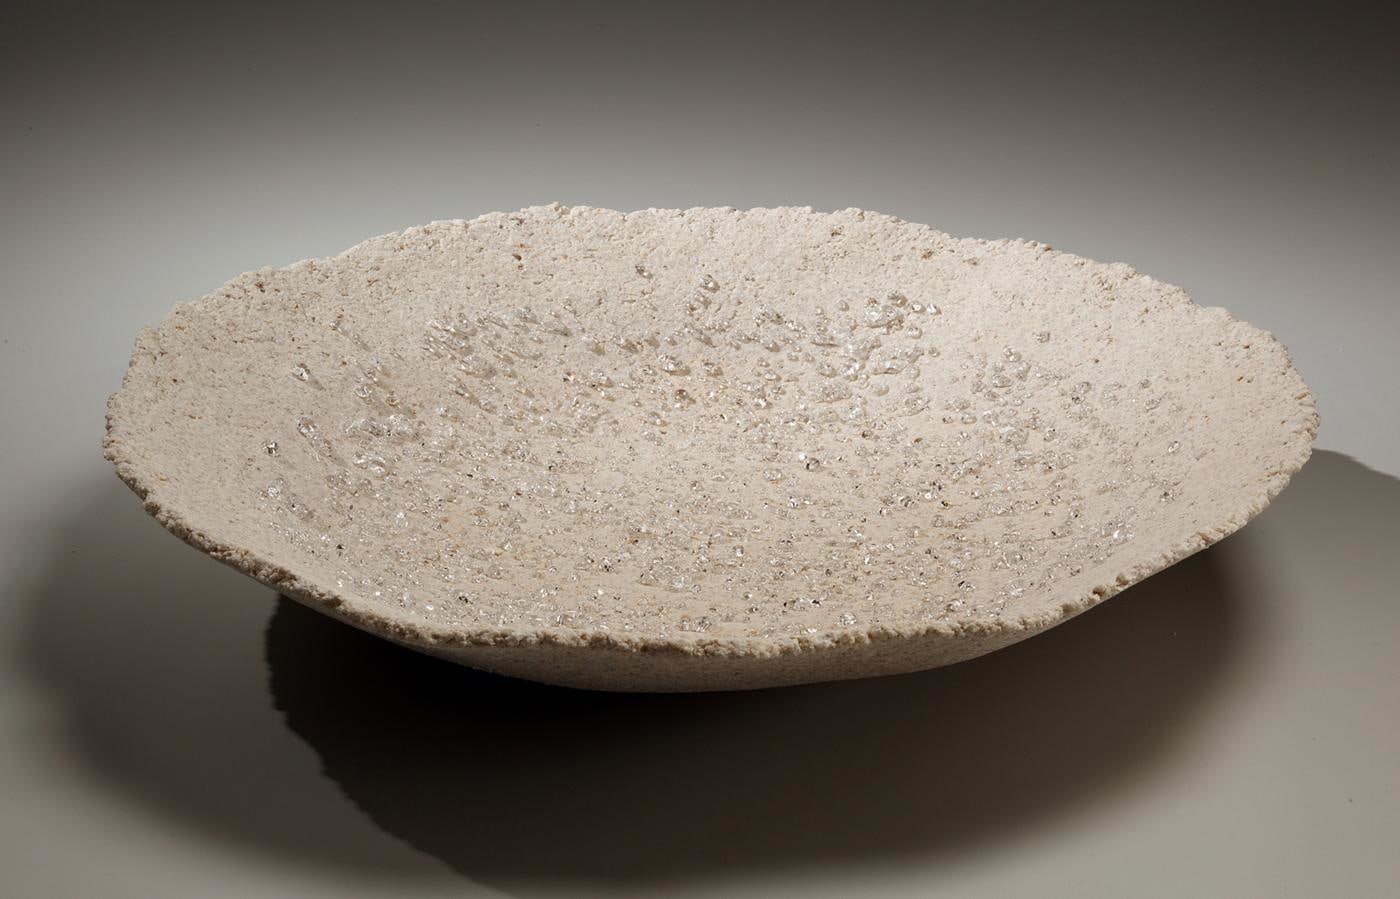 Round platter with scattered clear glass droplets and pinched rough rim